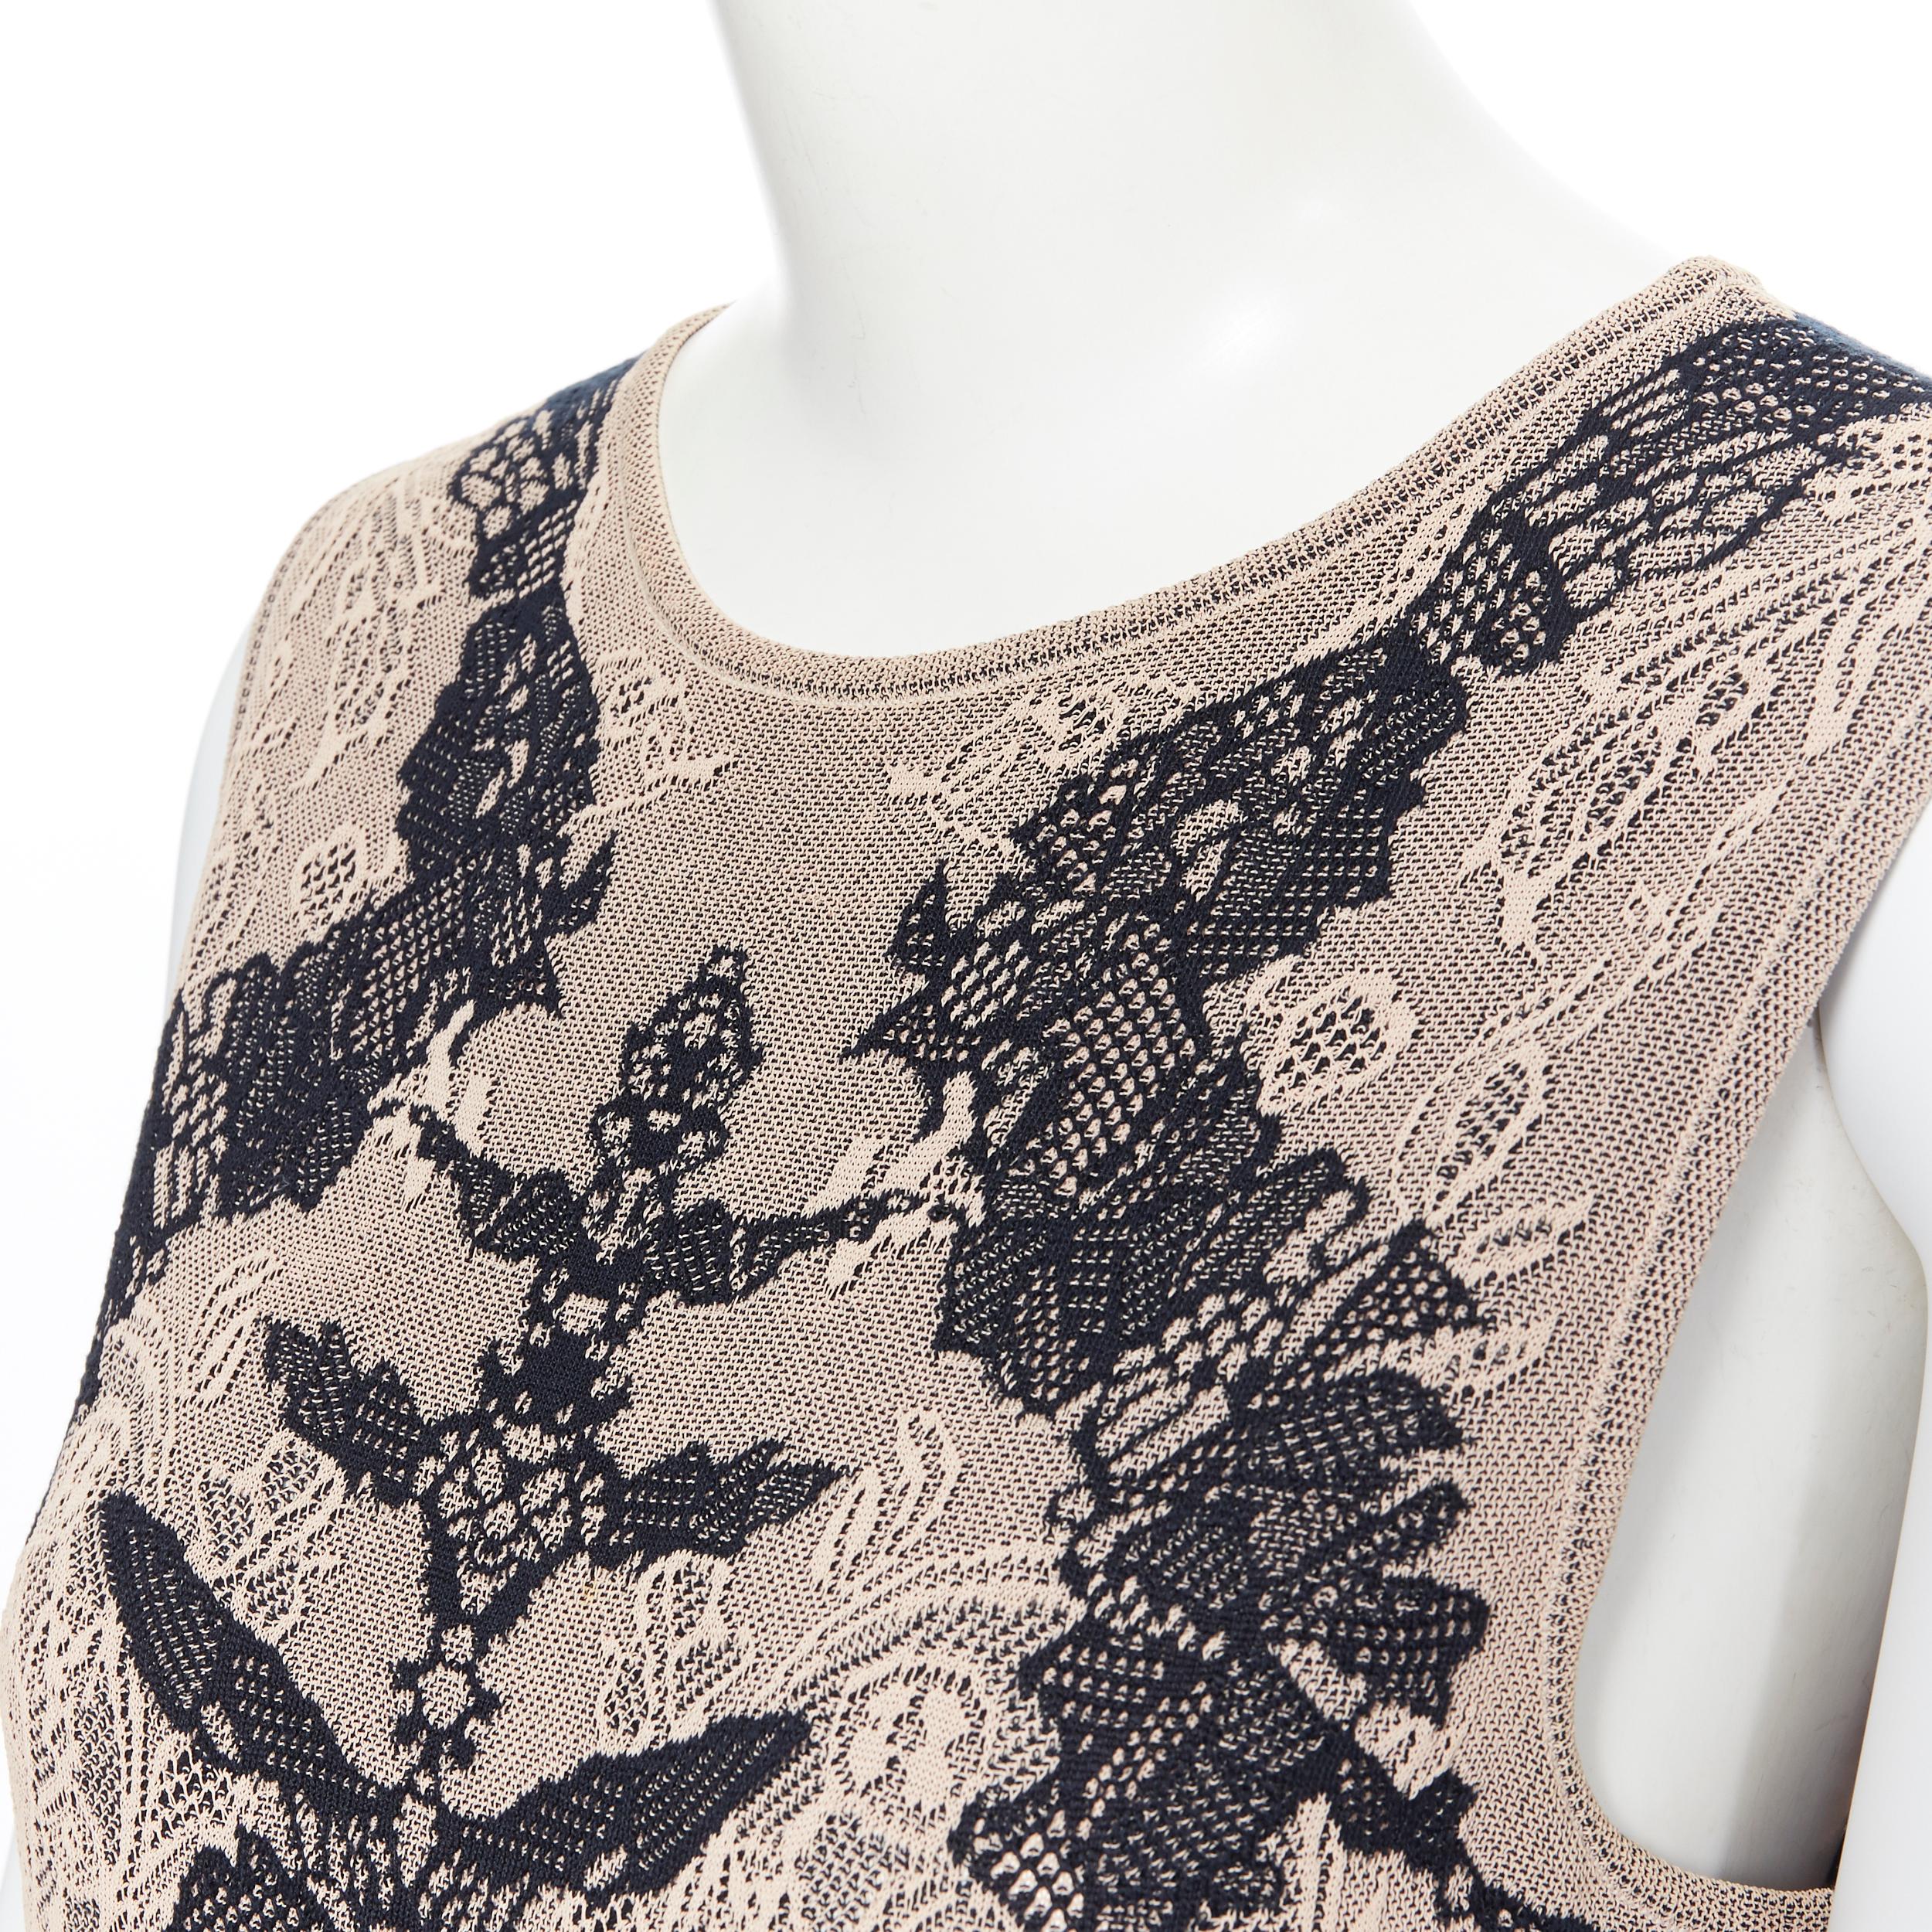 ALEXANDER MCQUEEN nude black asymmetric lace intarsia bodycon stretch dress L
Brand: Alexander McQueen
Designer: Alexander McQueen
Model Name / Style: Cocktail dress
Material: Viscose, silk
Color: Beige and black
Pattern: Floral
Extra Detail: